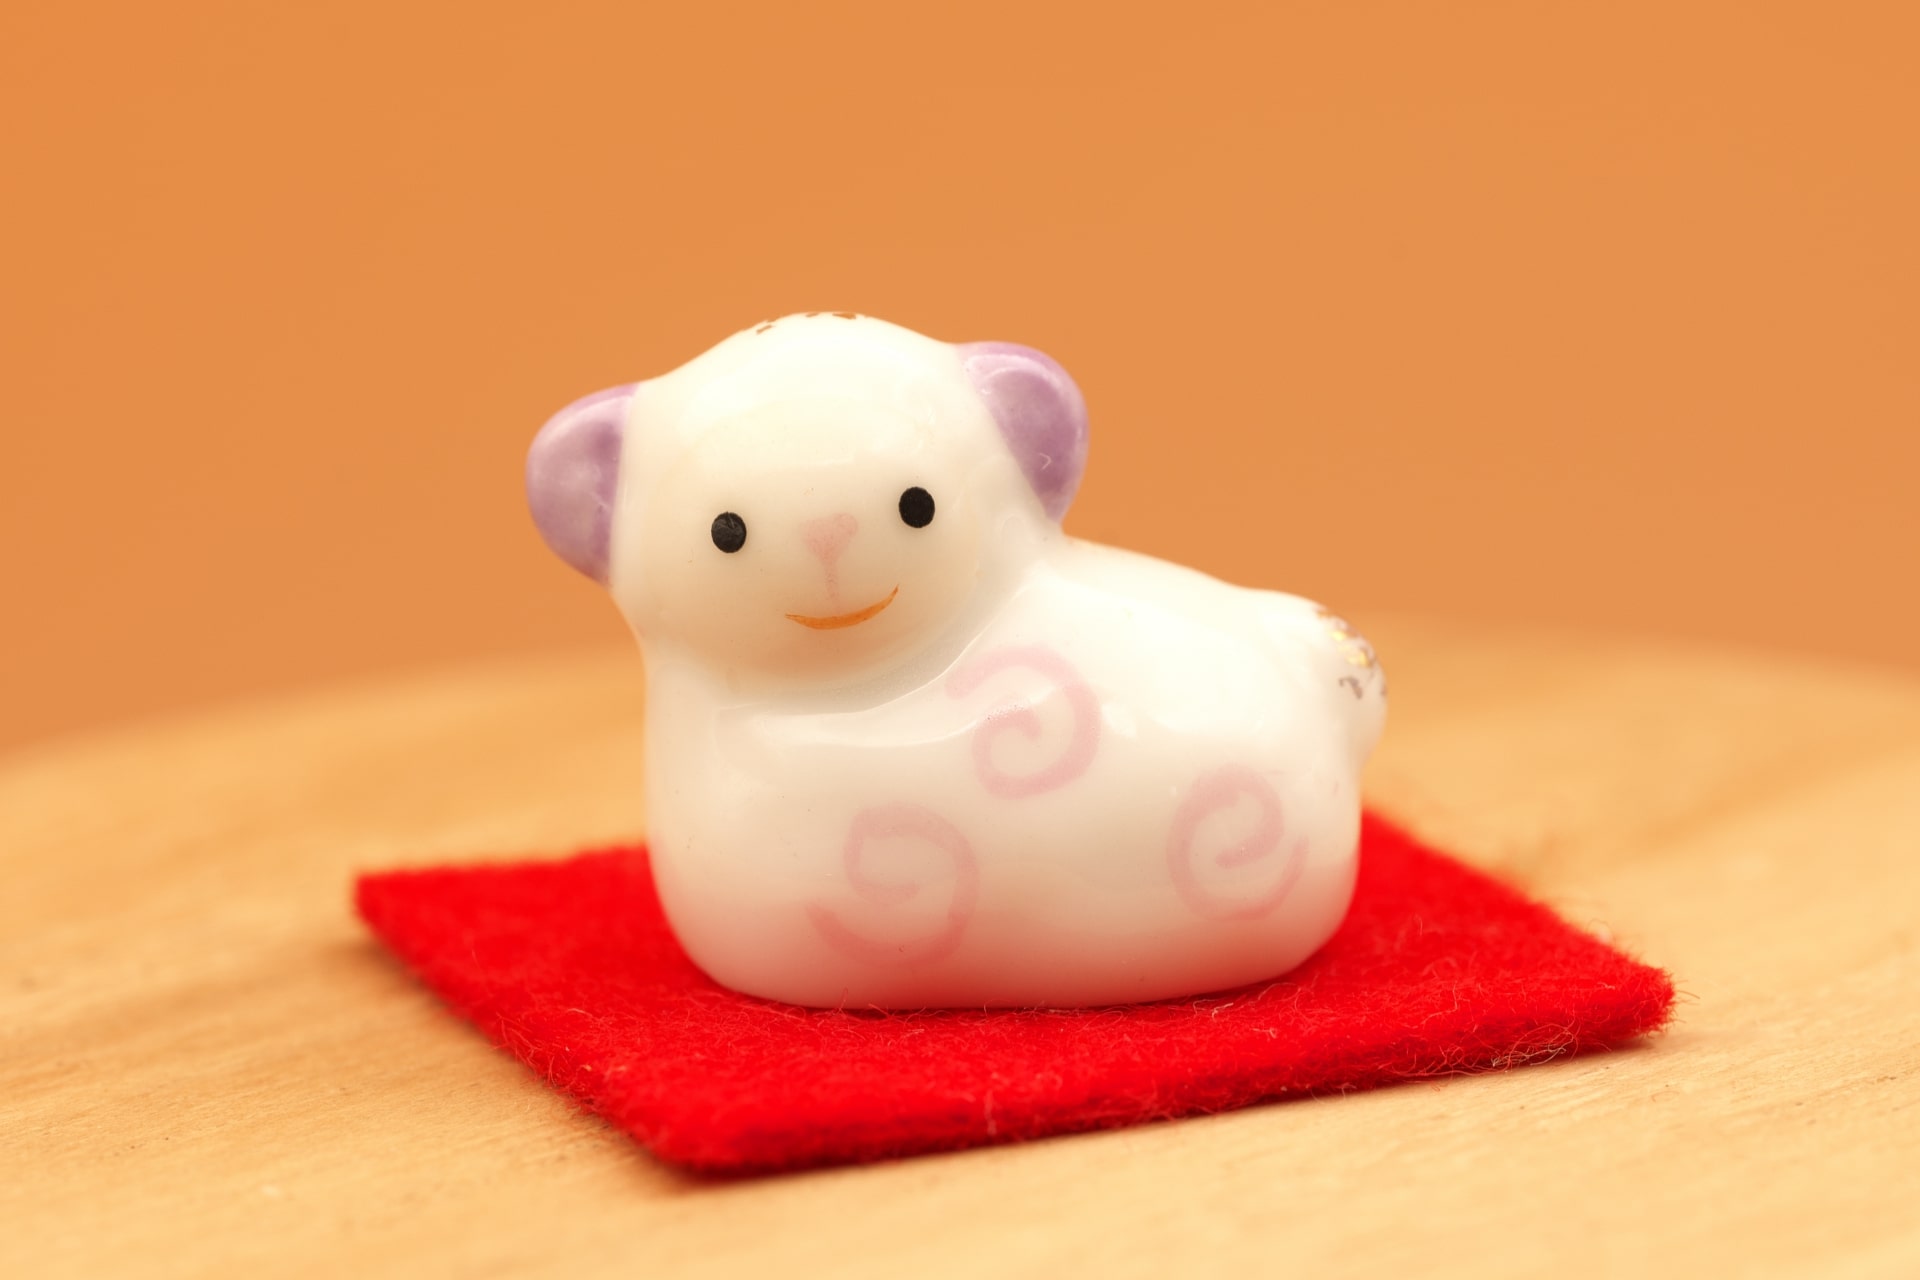 Small figurine depicting the sheep from Chinese Zodiac